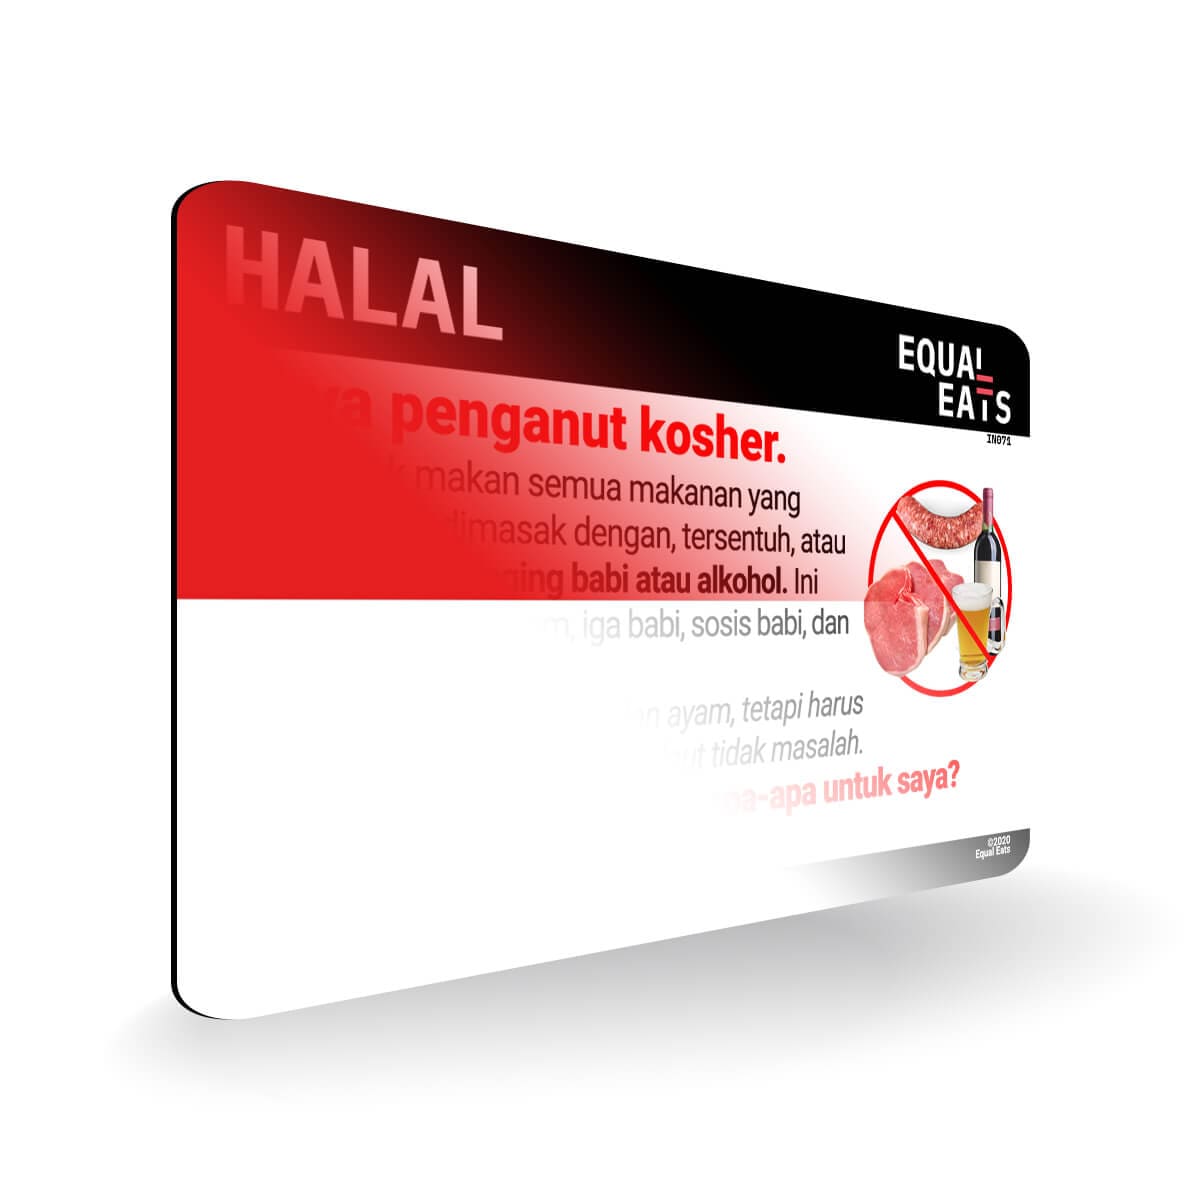 Halal Diet in Indonesian. Halal Food Card for Indonesia